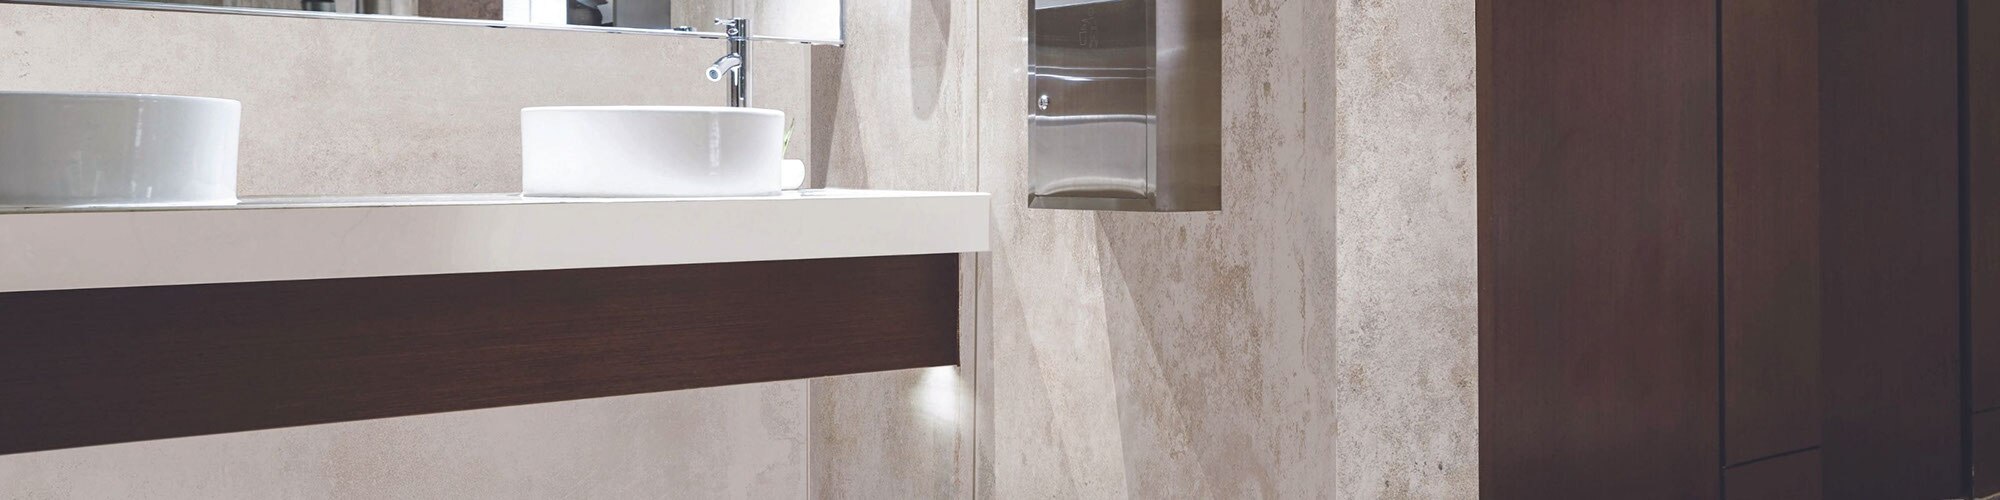 Office building bathroom with off-white & beige porcelain slab wall and backsplash, floating vanity of wood with white quartz countertop and vessel sinks, and dark wood stall doors.